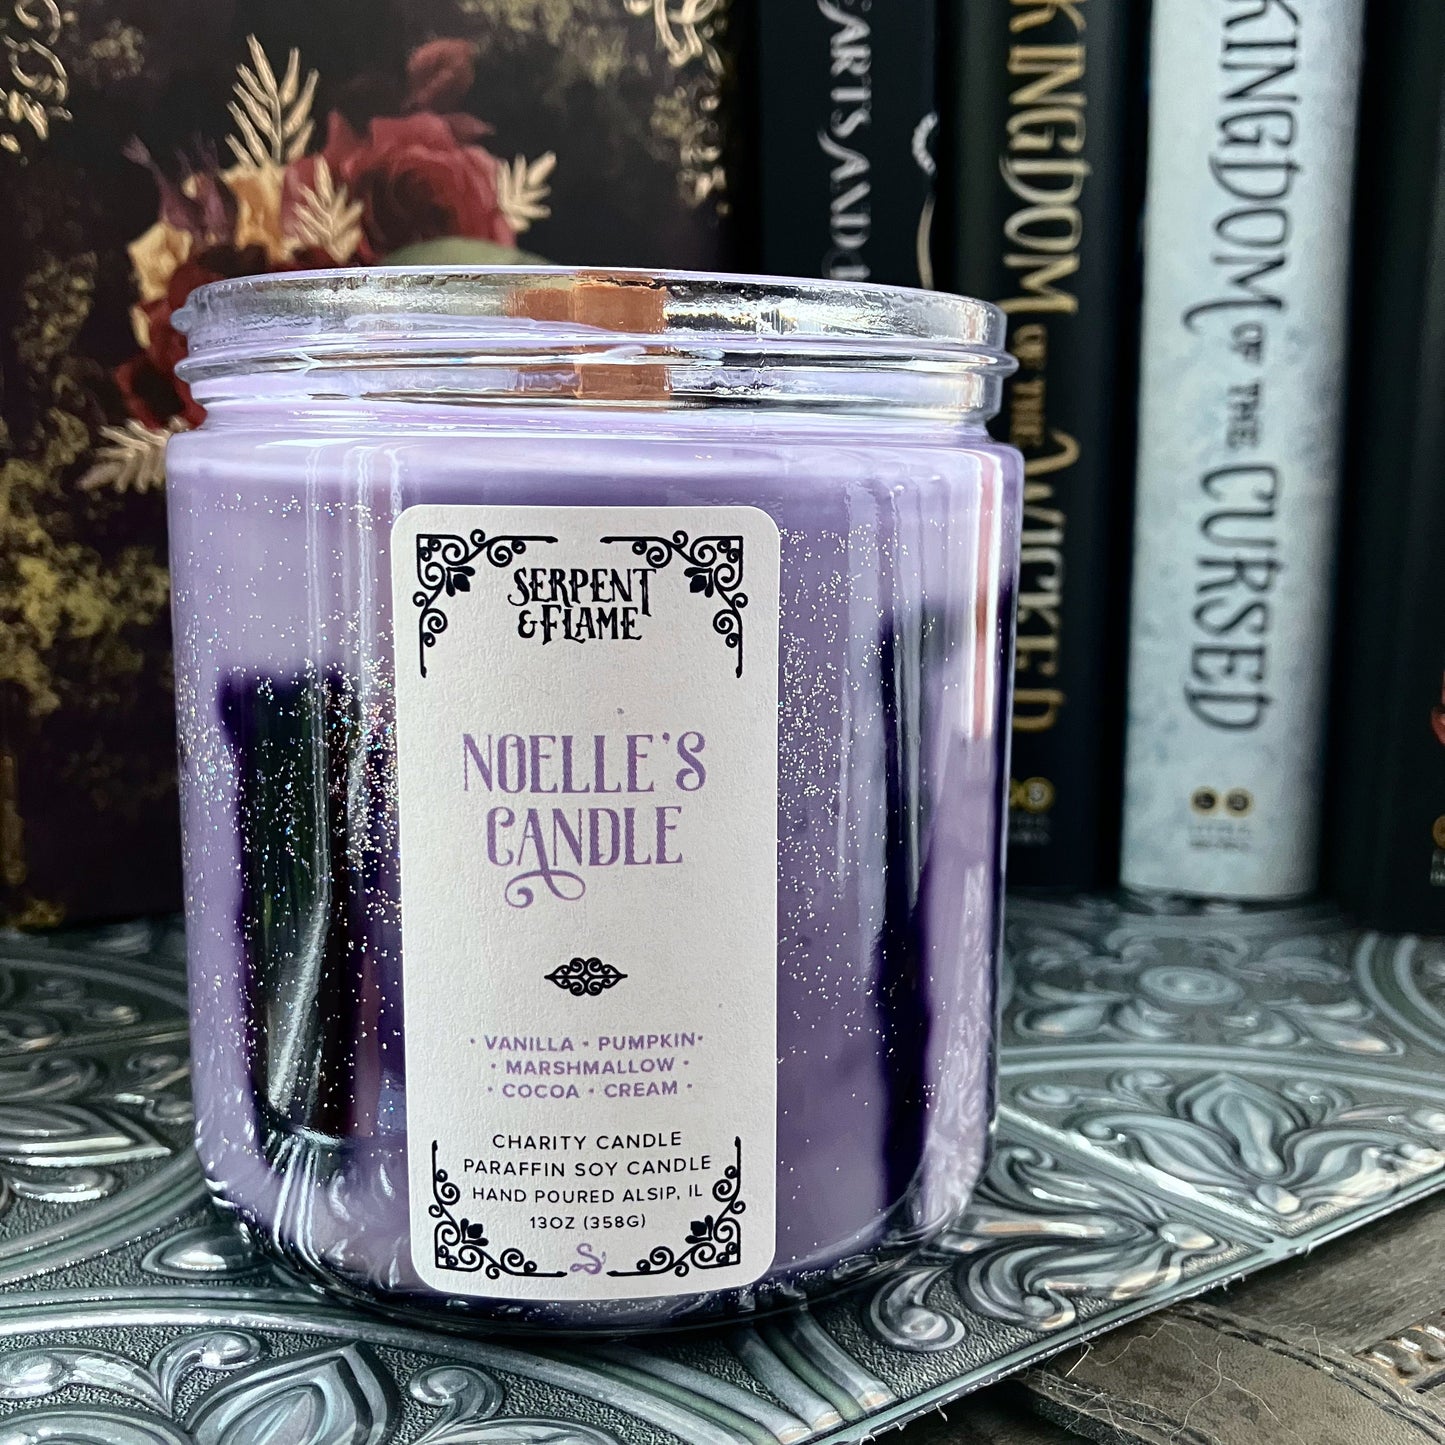 Noelle's Charity Candle